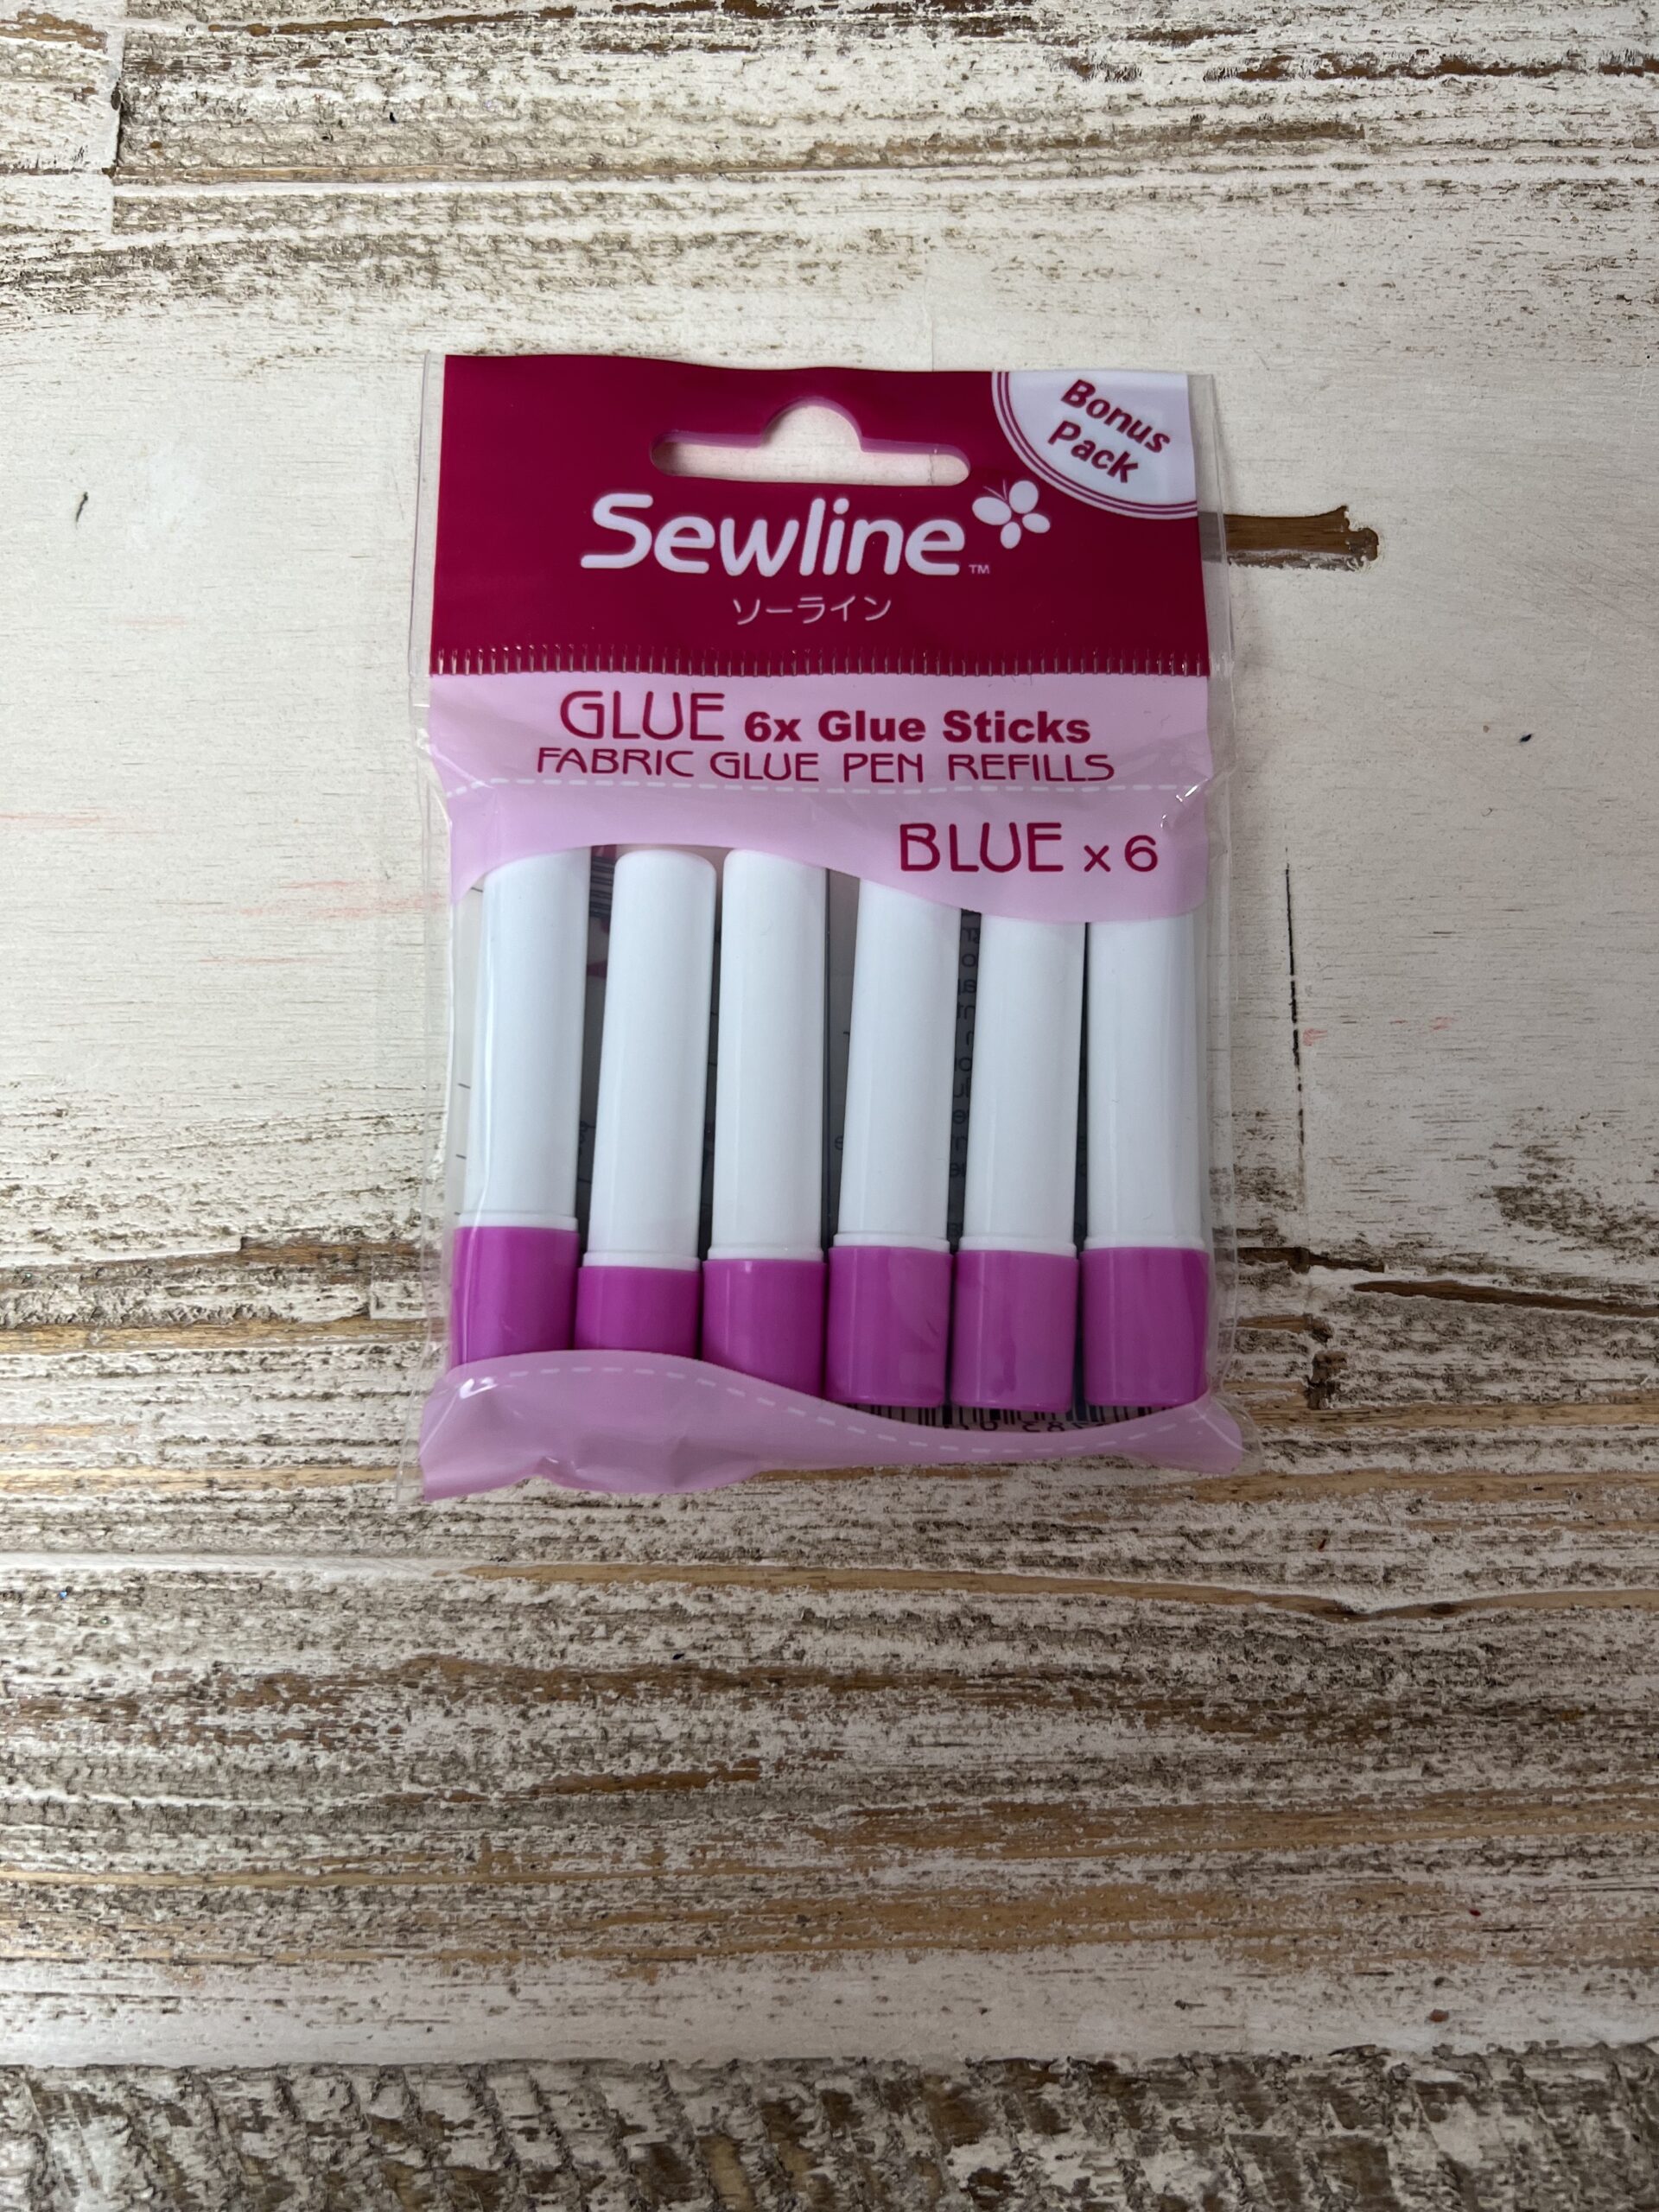 Bundle of Sewline Fabric Glue Pen(S) Blue, and Fabric Glue Pen Refill 2-Pack(S) Blue (1 Pen, 1 Refills)